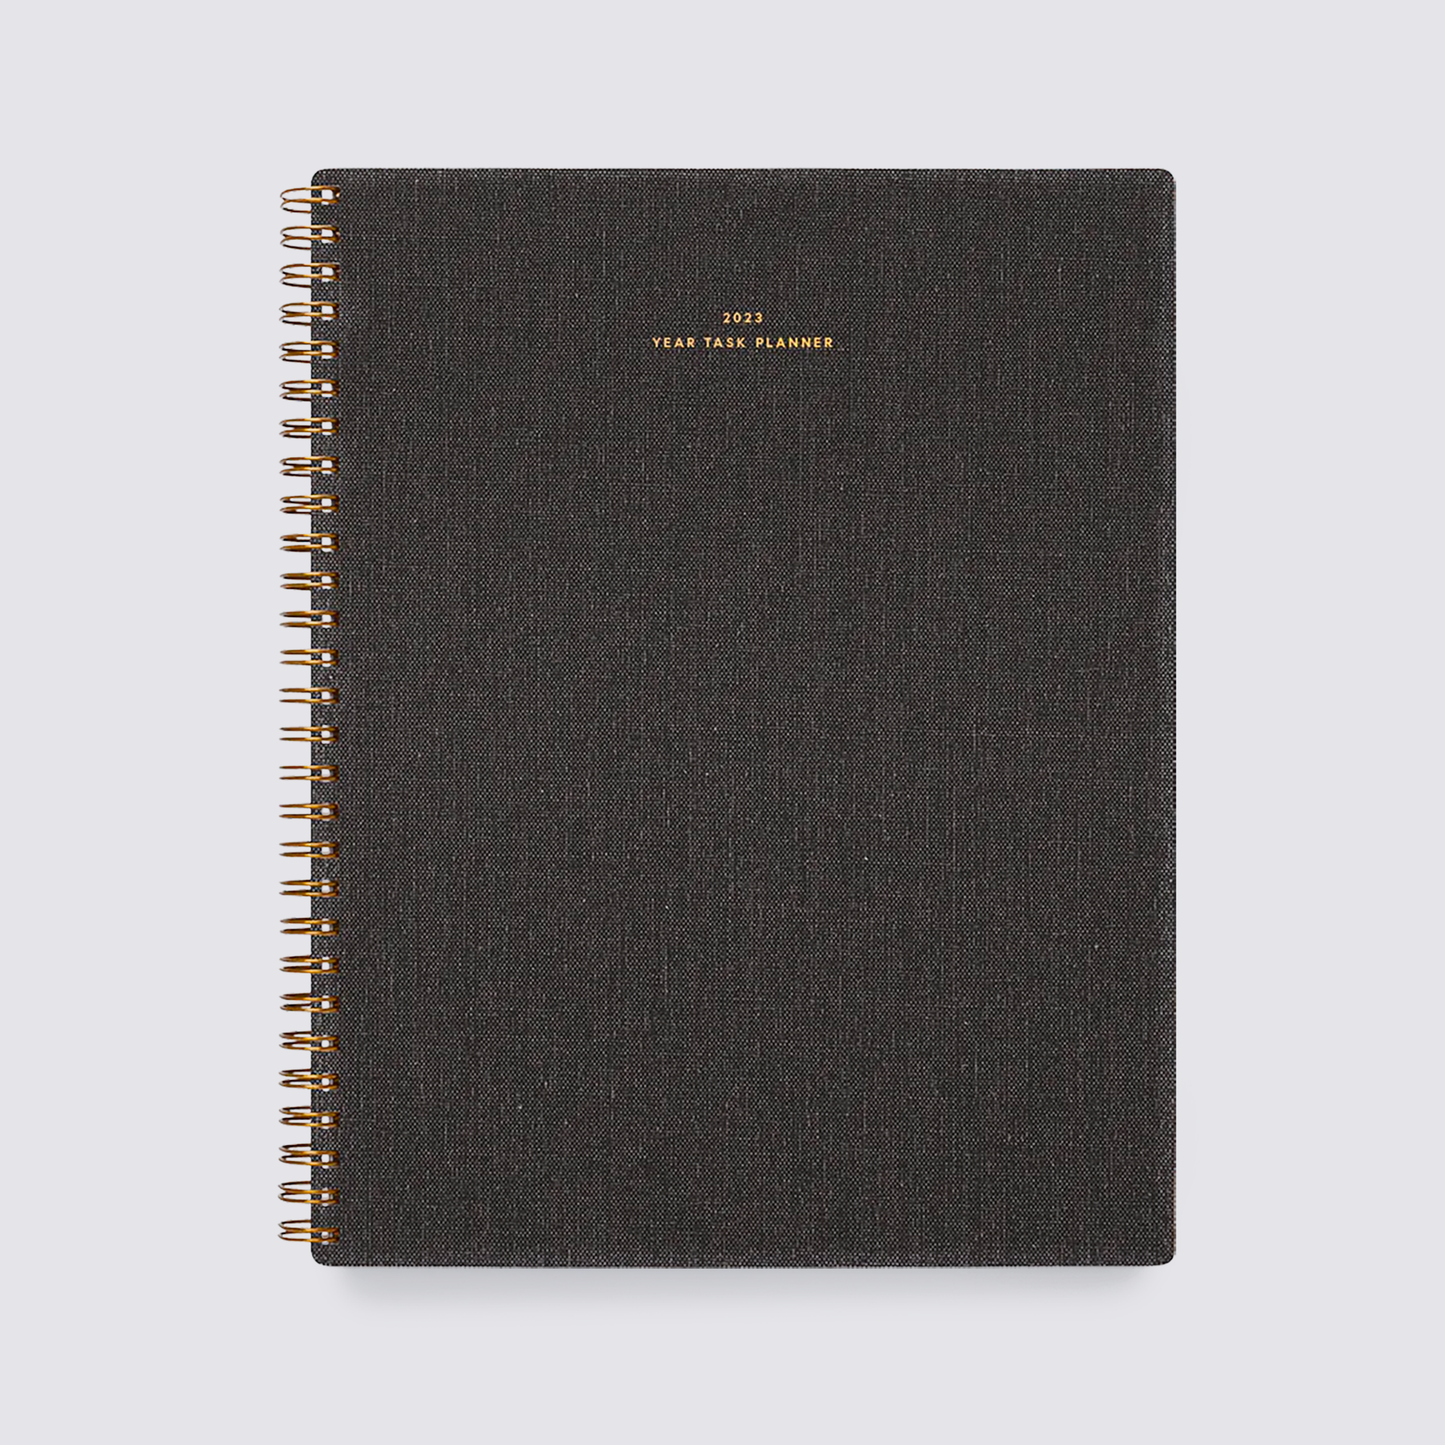 2023 Year Task Planner - Charcoal Grey